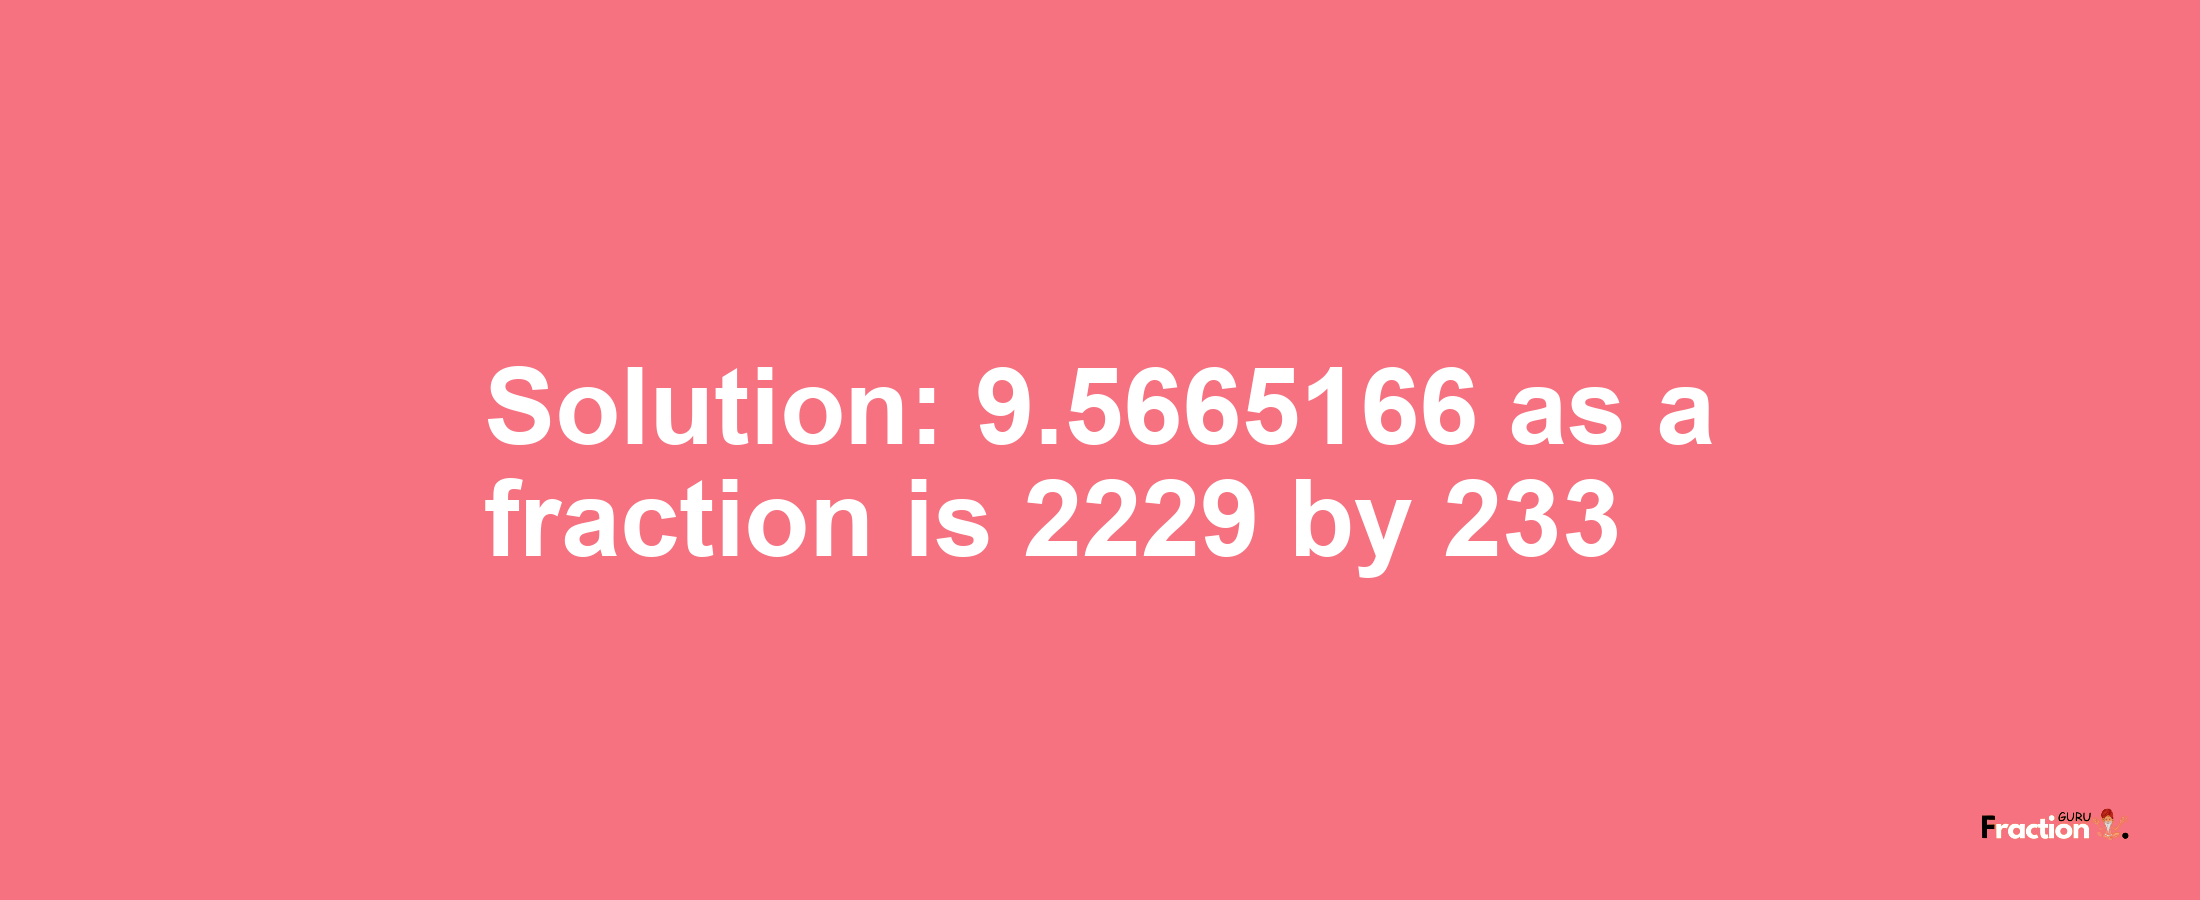 Solution:9.5665166 as a fraction is 2229/233